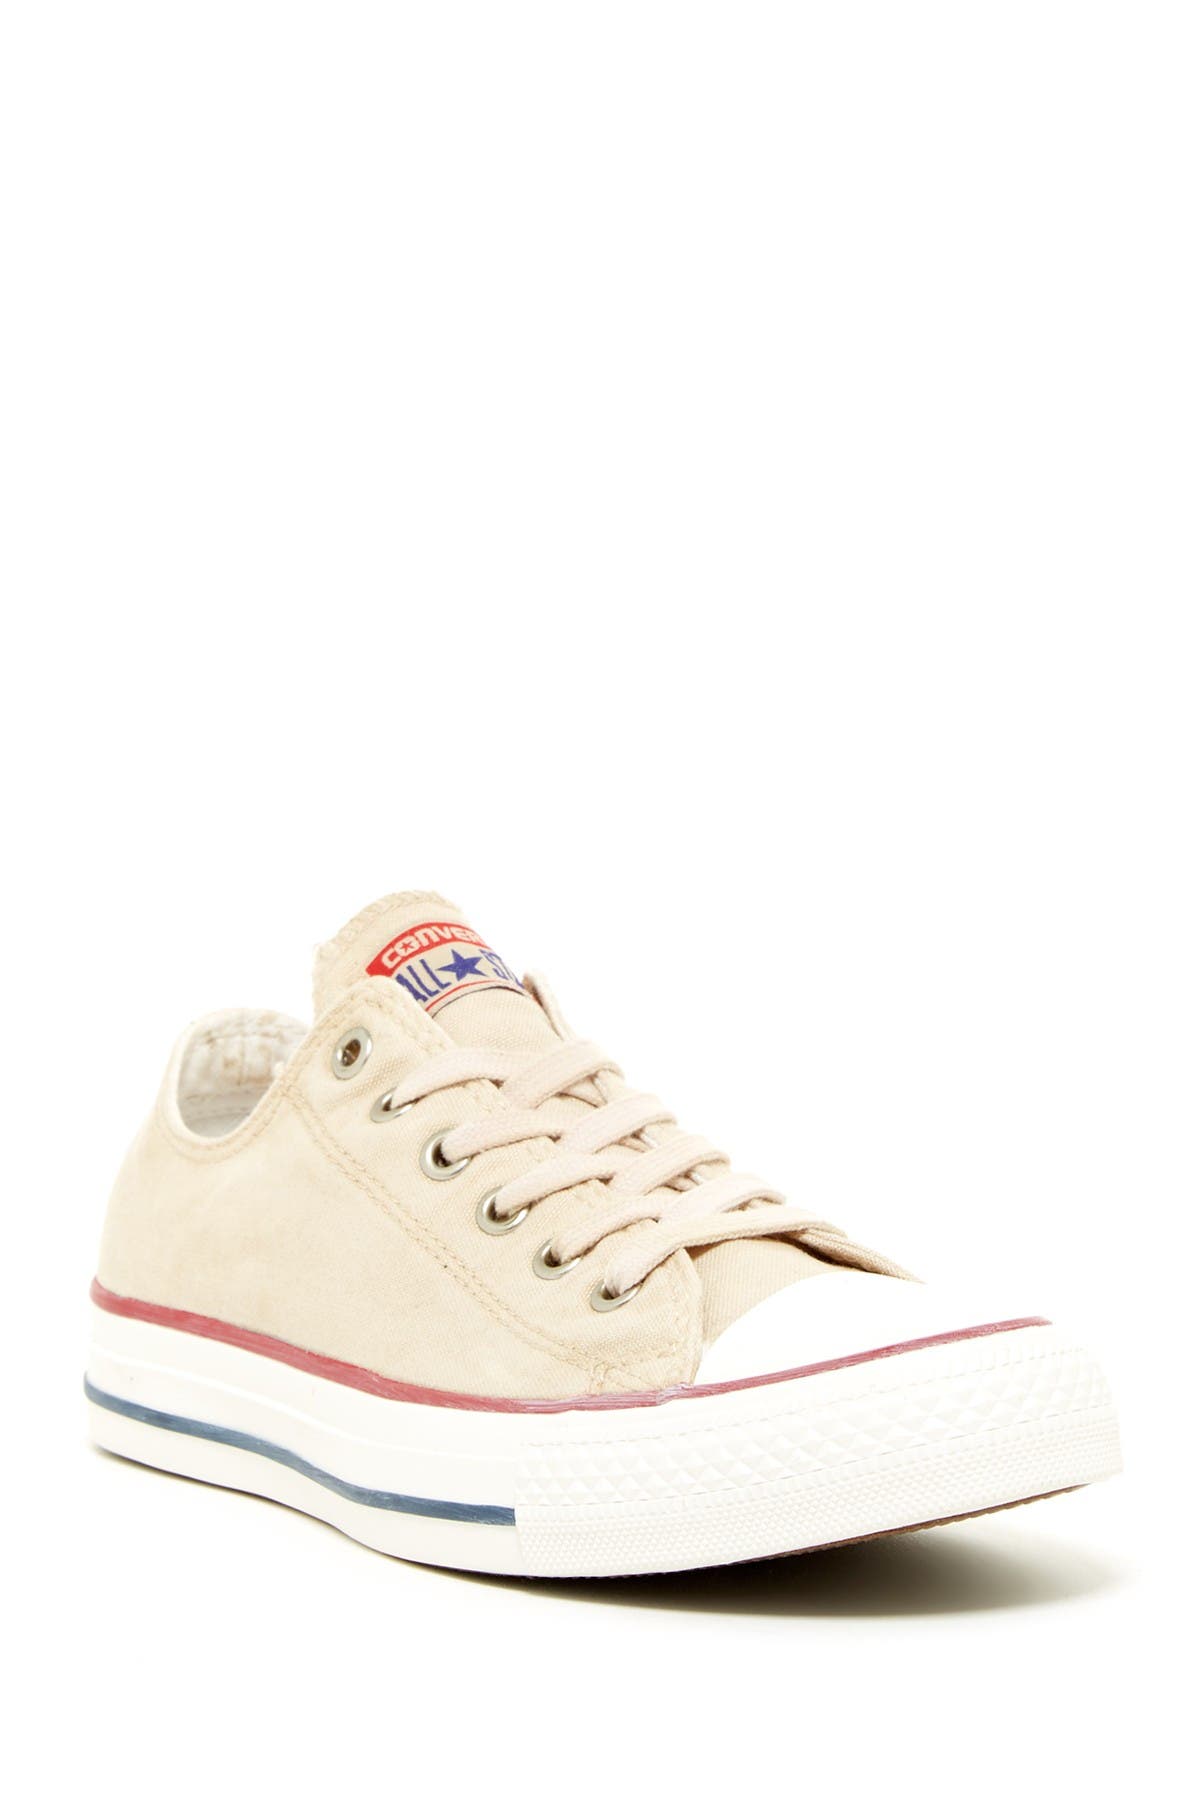 Converse | Chuck Taylor All Star Low 